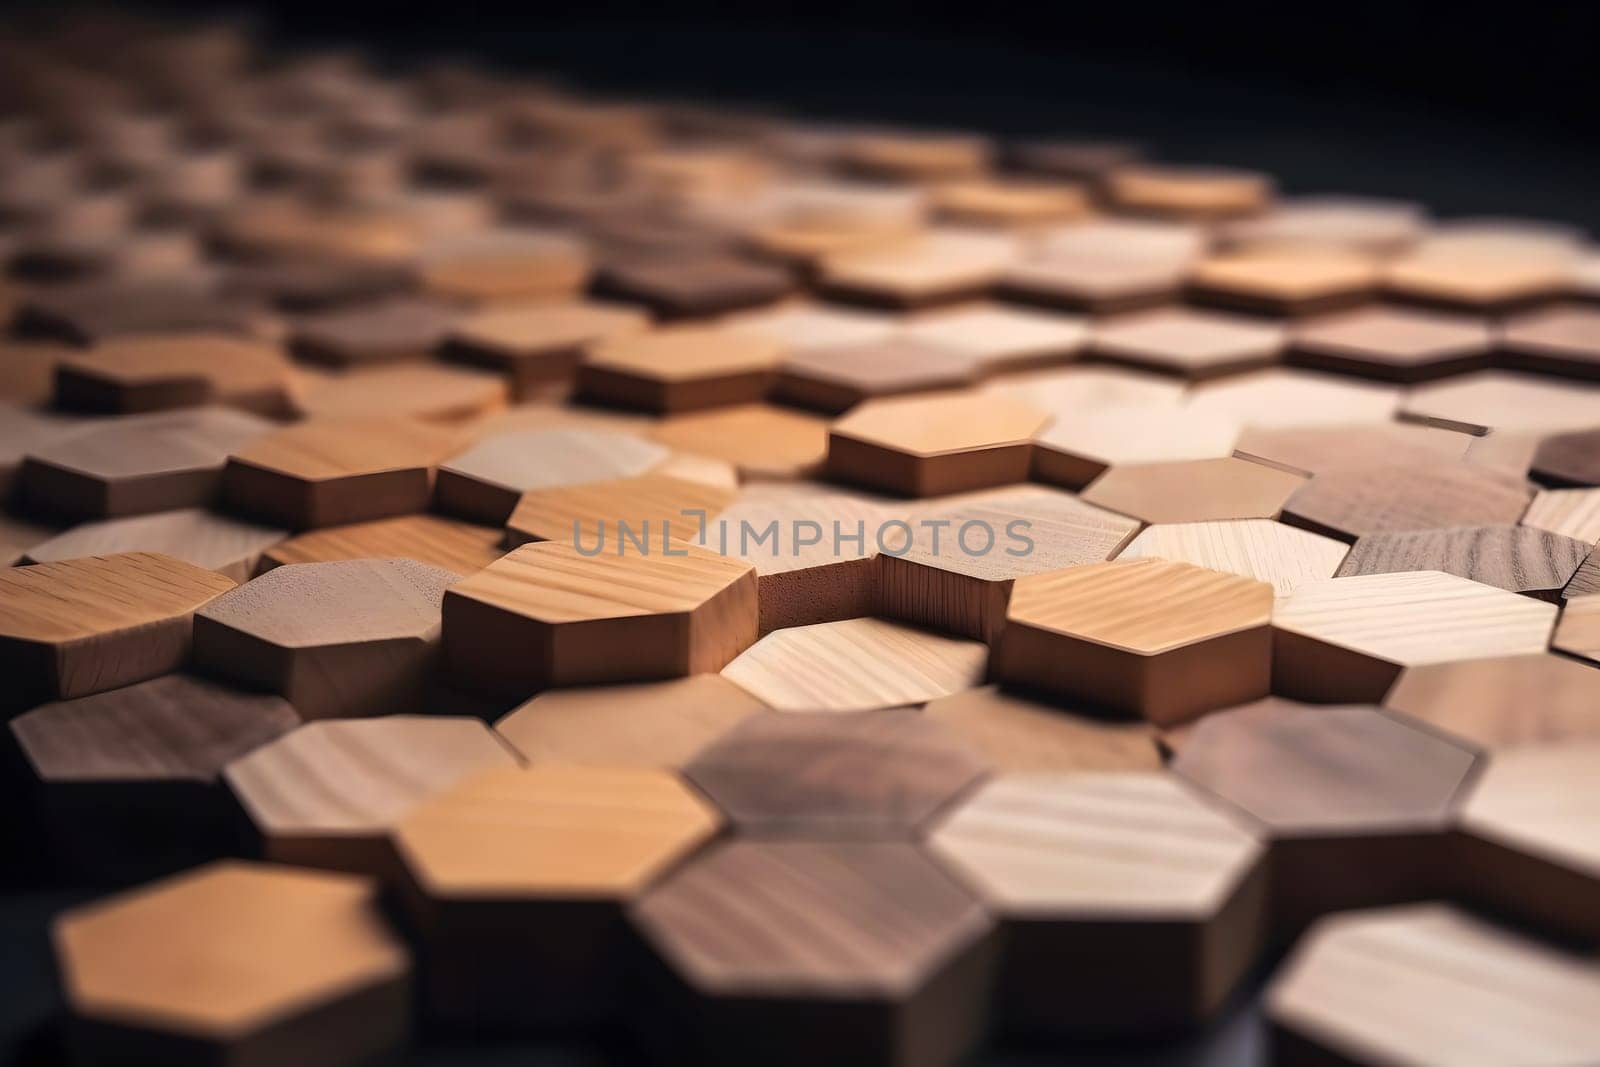 closeup background of tiled hexagonal wooden dowel ends, neural network generated art by z1b